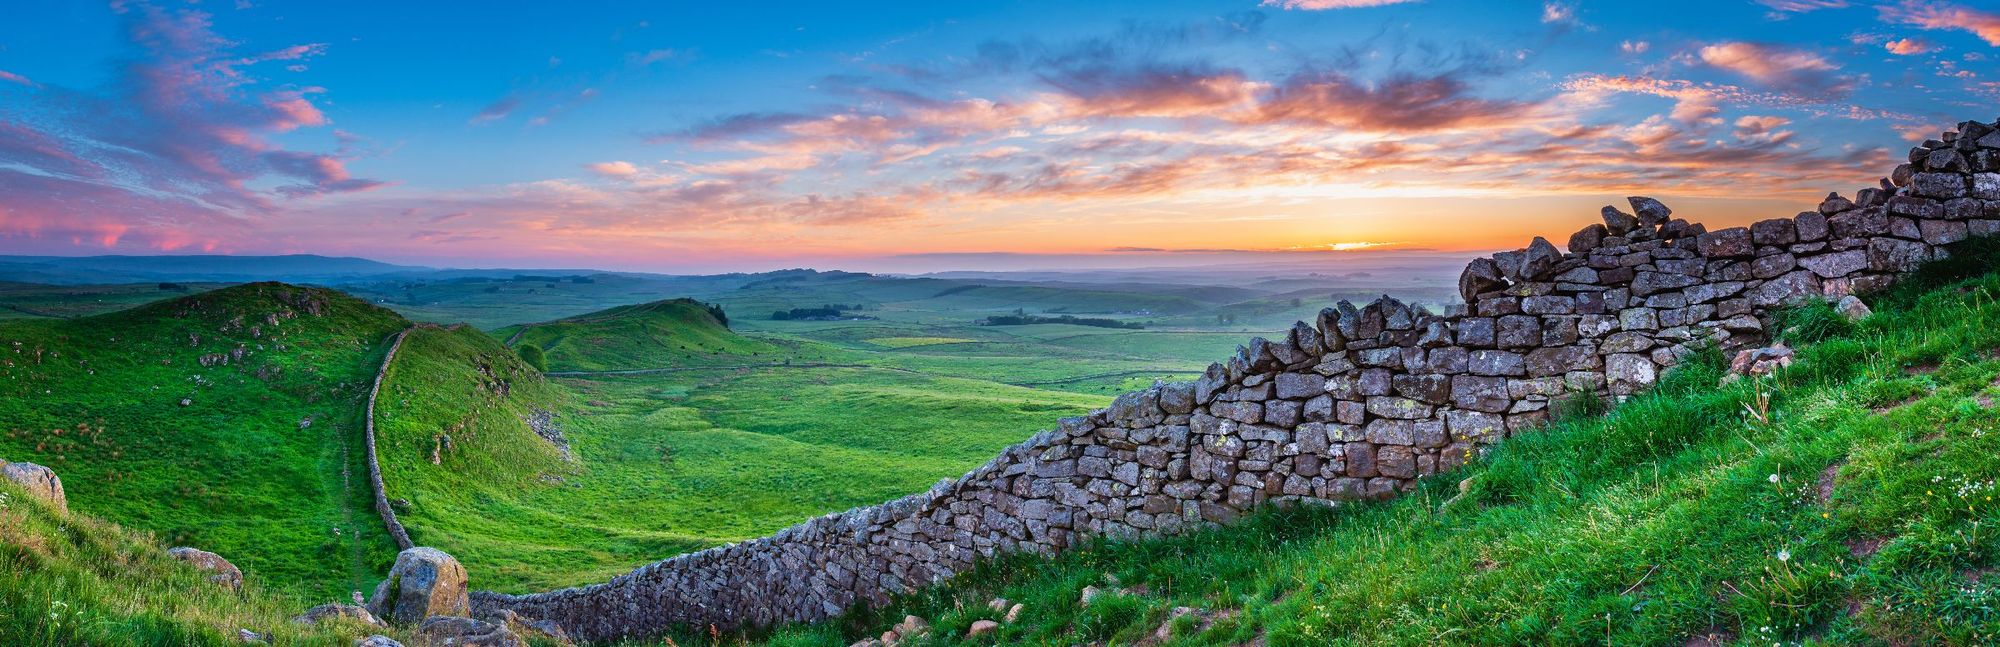 Hadrian's Wall Today